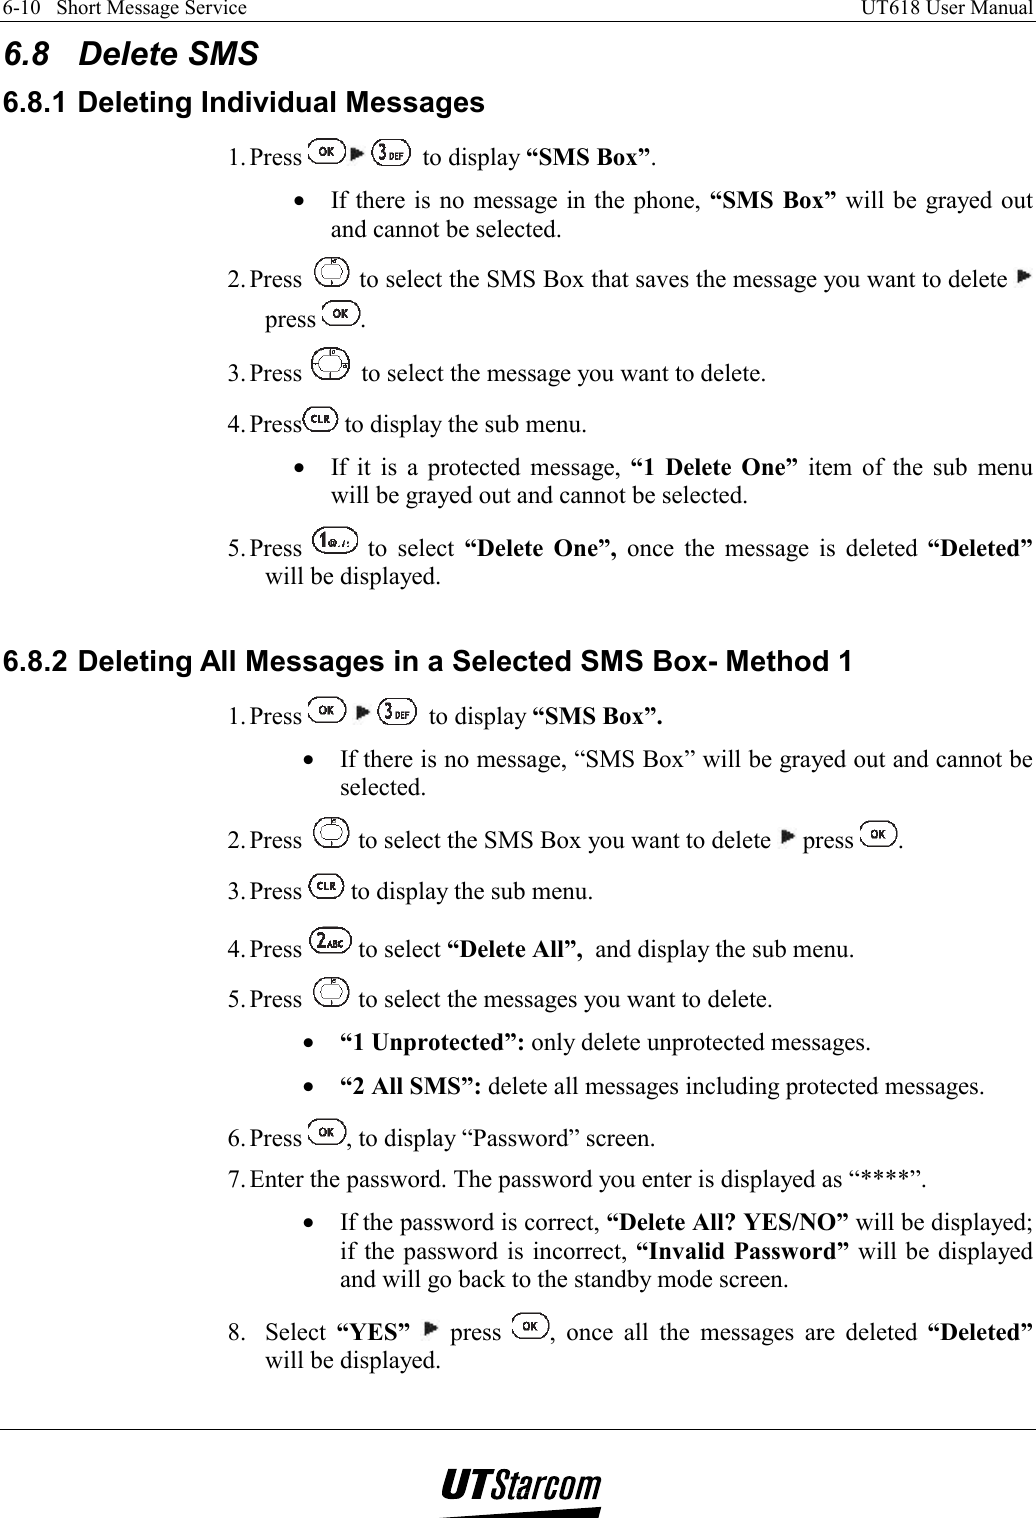 6-10   Short Message Service    UT618 User Manual   6.8 Delete SMS 6.8.1 Deleting Individual Messages 1. Press    to display “SMS Box”. •  If there is no message in the phone, “SMS Box” will be grayed out and cannot be selected. 2. Press   to select the SMS Box that saves the message you want to delete   press  . 3. Press   to select the message you want to delete. 4. Press  to display the sub menu. •  If it is a protected message, “1 Delete One” item of the sub menu will be grayed out and cannot be selected. 5. Press   to select “Delete One”, once the message is deleted “Deleted” will be displayed.  6.8.2 Deleting All Messages in a Selected SMS Box- Method 1 1. Press       to display “SMS Box”. •  If there is no message, “SMS Box” will be grayed out and cannot be selected. 2. Press   to select the SMS Box you want to delete   press  . 3. Press   to display the sub menu. 4. Press   to select “Delete All”,  and display the sub menu. 5. Press   to select the messages you want to delete. •  “1 Unprotected”: only delete unprotected messages. •  “2 All SMS”: delete all messages including protected messages. 6. Press  , to display “Password” screen. 7. Enter the password. The password you enter is displayed as “****”. •  If the password is correct, “Delete All? YES/NO” will be displayed; if the password is incorrect, “Invalid Password” will be displayed and will go back to the standby mode screen. 8. Select “YES”  press  , once all the messages are deleted “Deleted” will be displayed.  